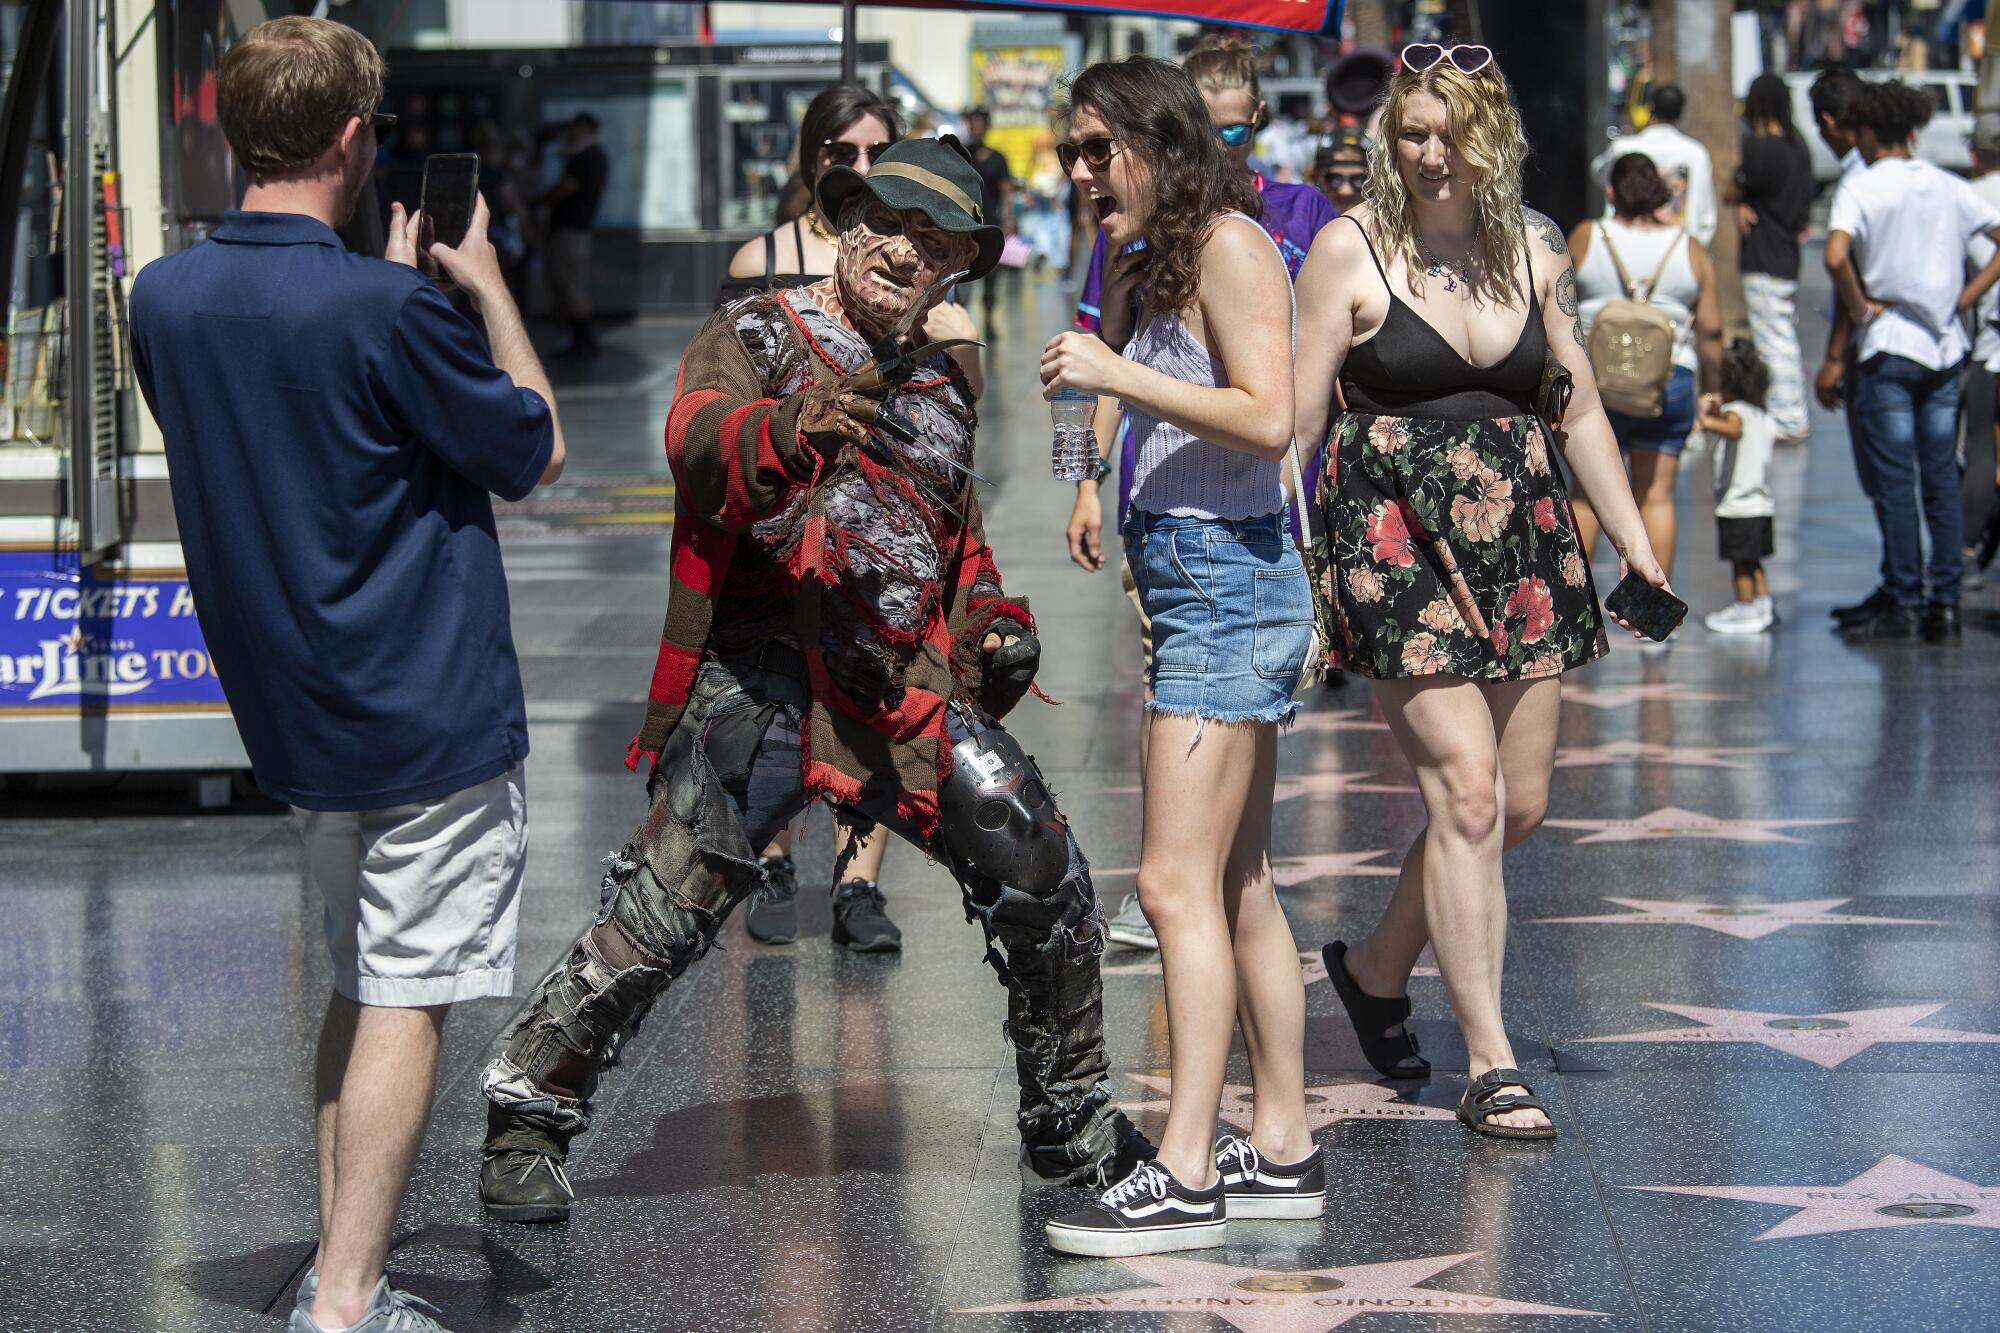 Alex Cannon, left, photographs friend Emilee Williams, posing with a street performer dressed as Freddy Krueger in Hollywood